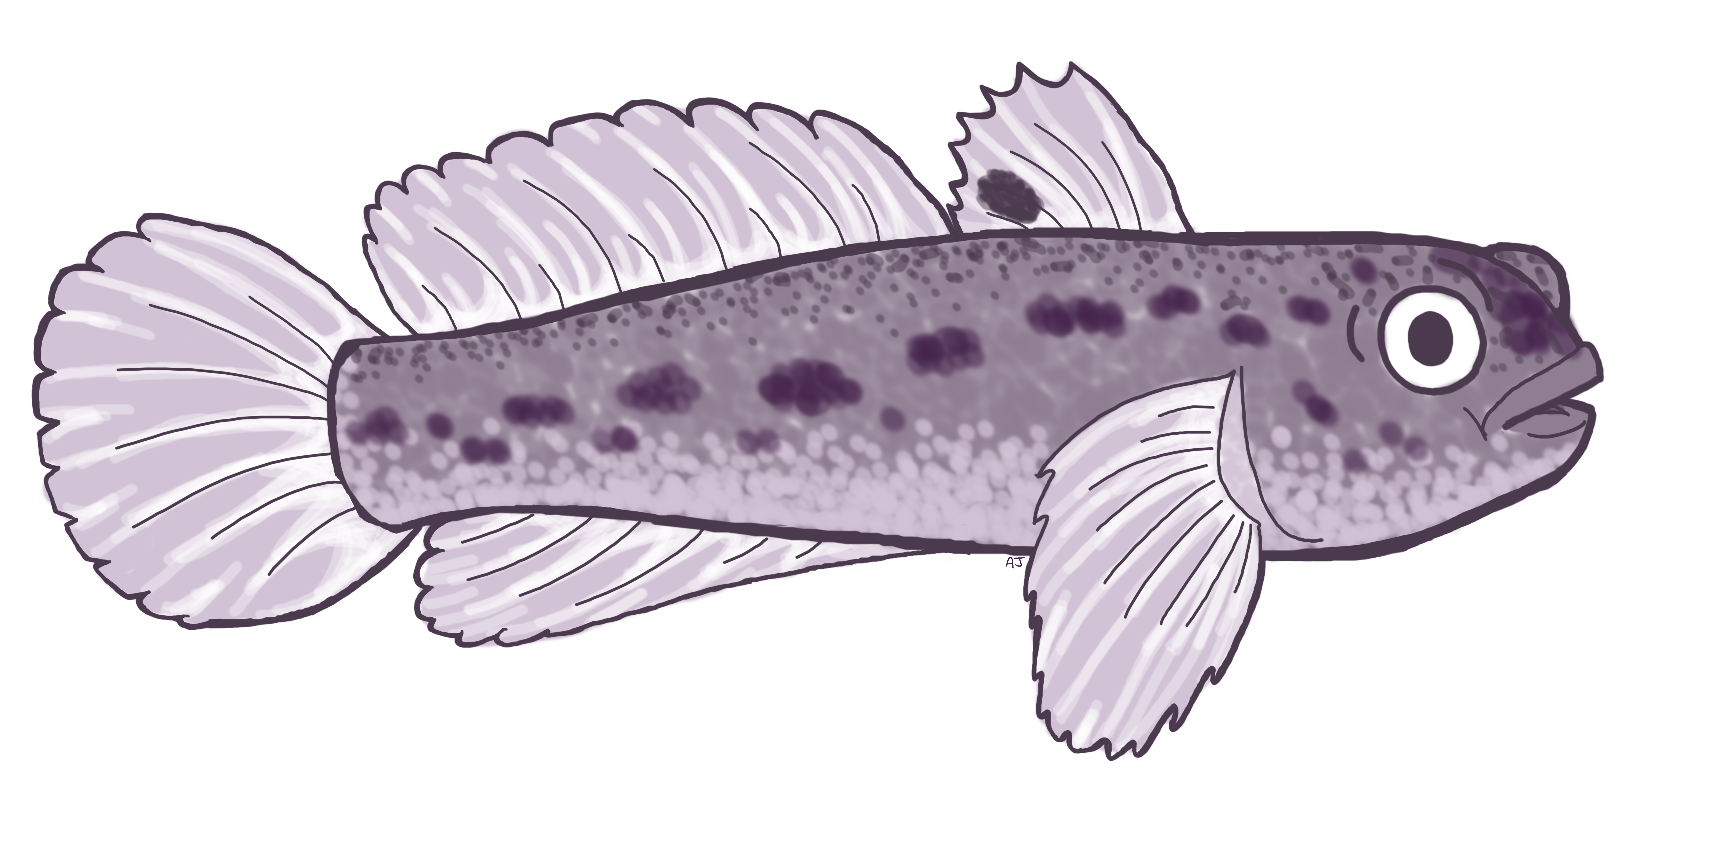 Round Goby by Meowthiroth on DeviantArt